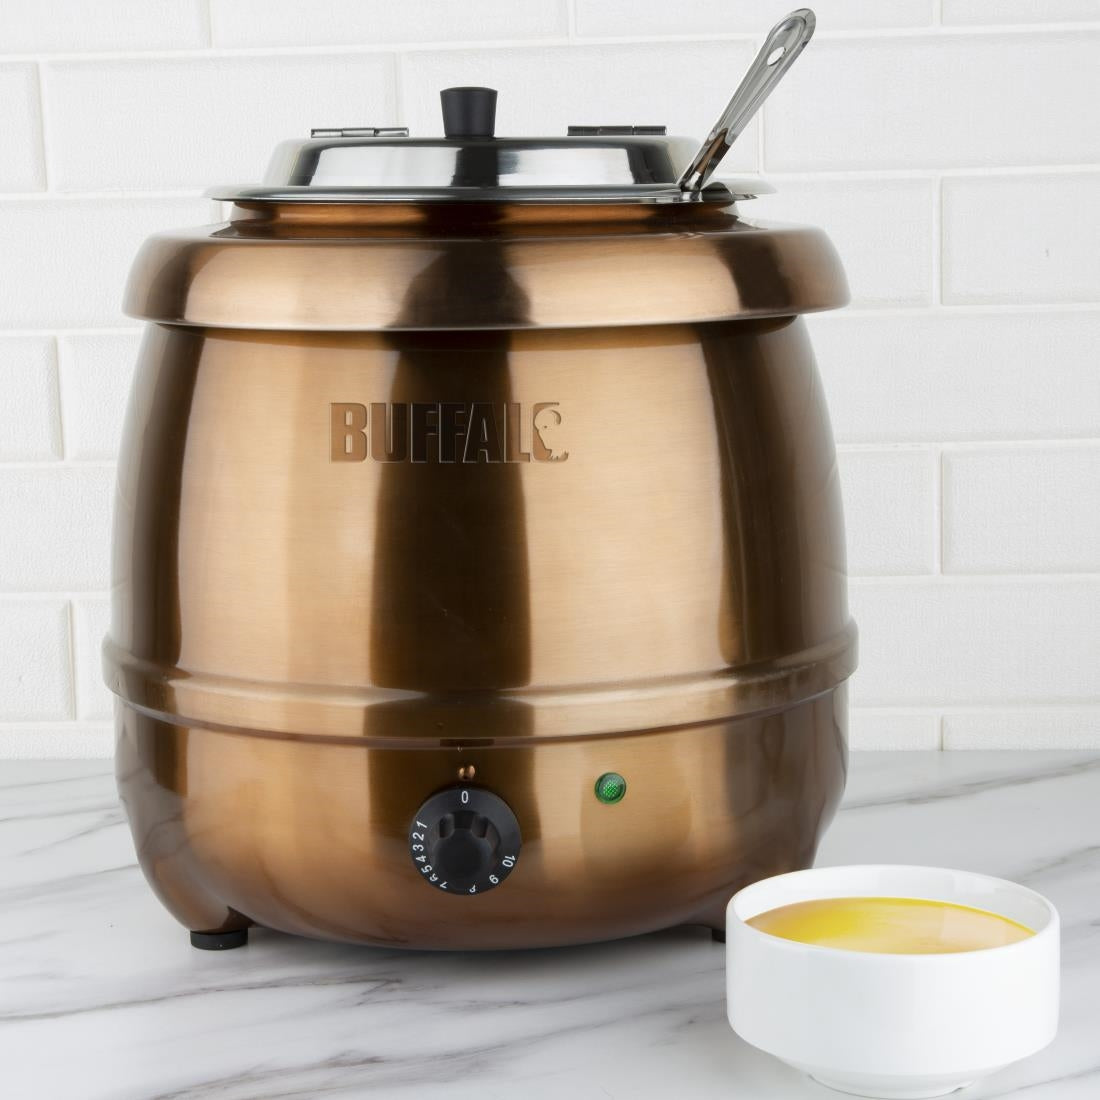 CP851 Buffalo Soup Kettle Copper Finish JD Catering Equipment Solutions Ltd